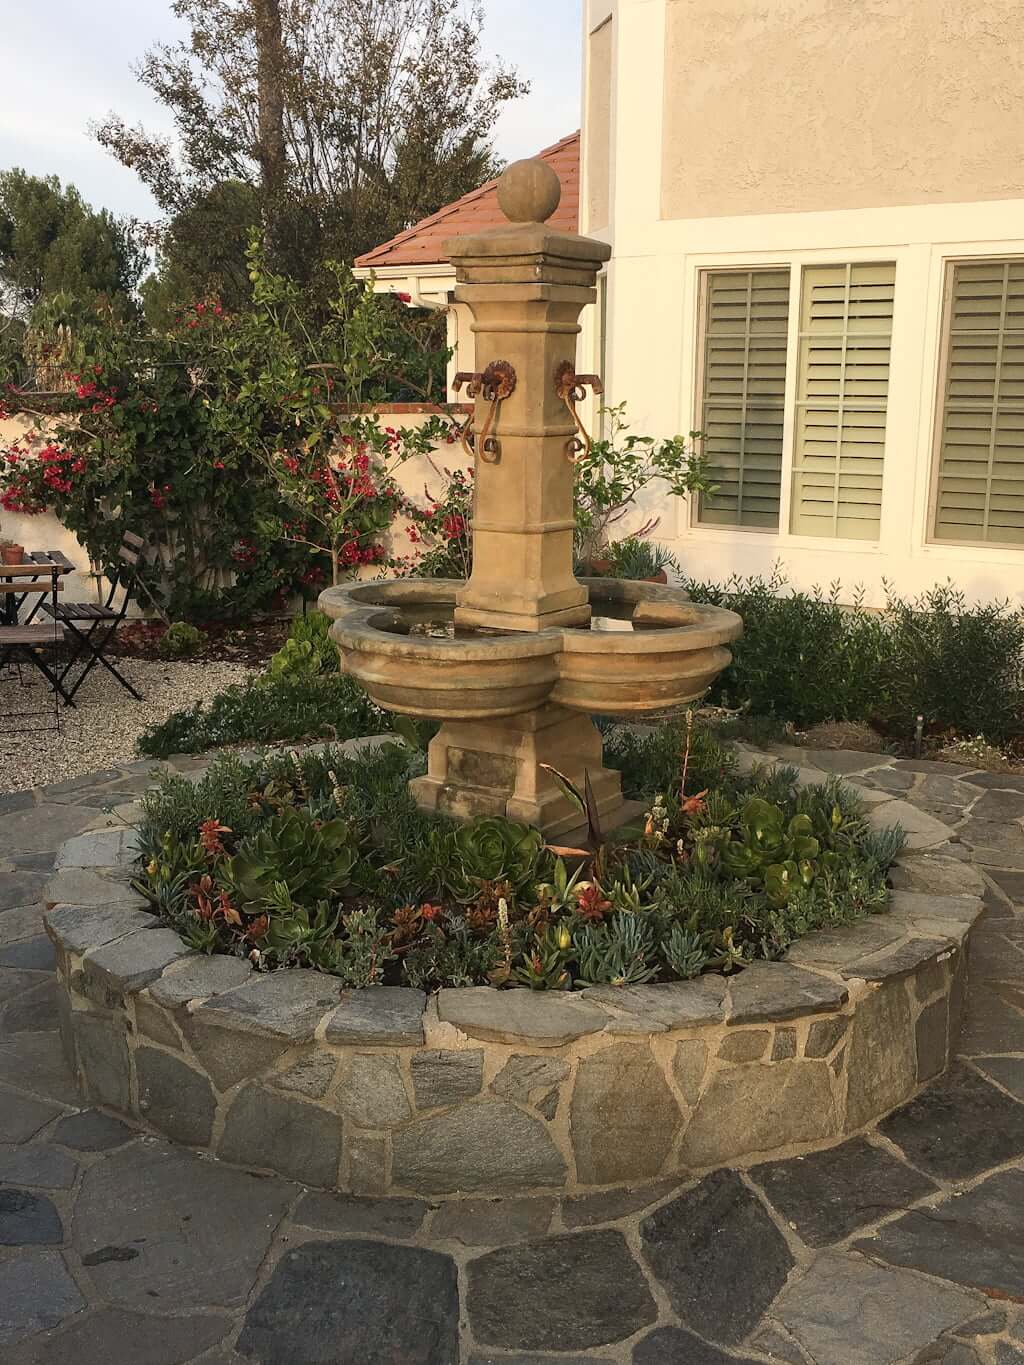 Mediterranean-style fountain in planter with succulents